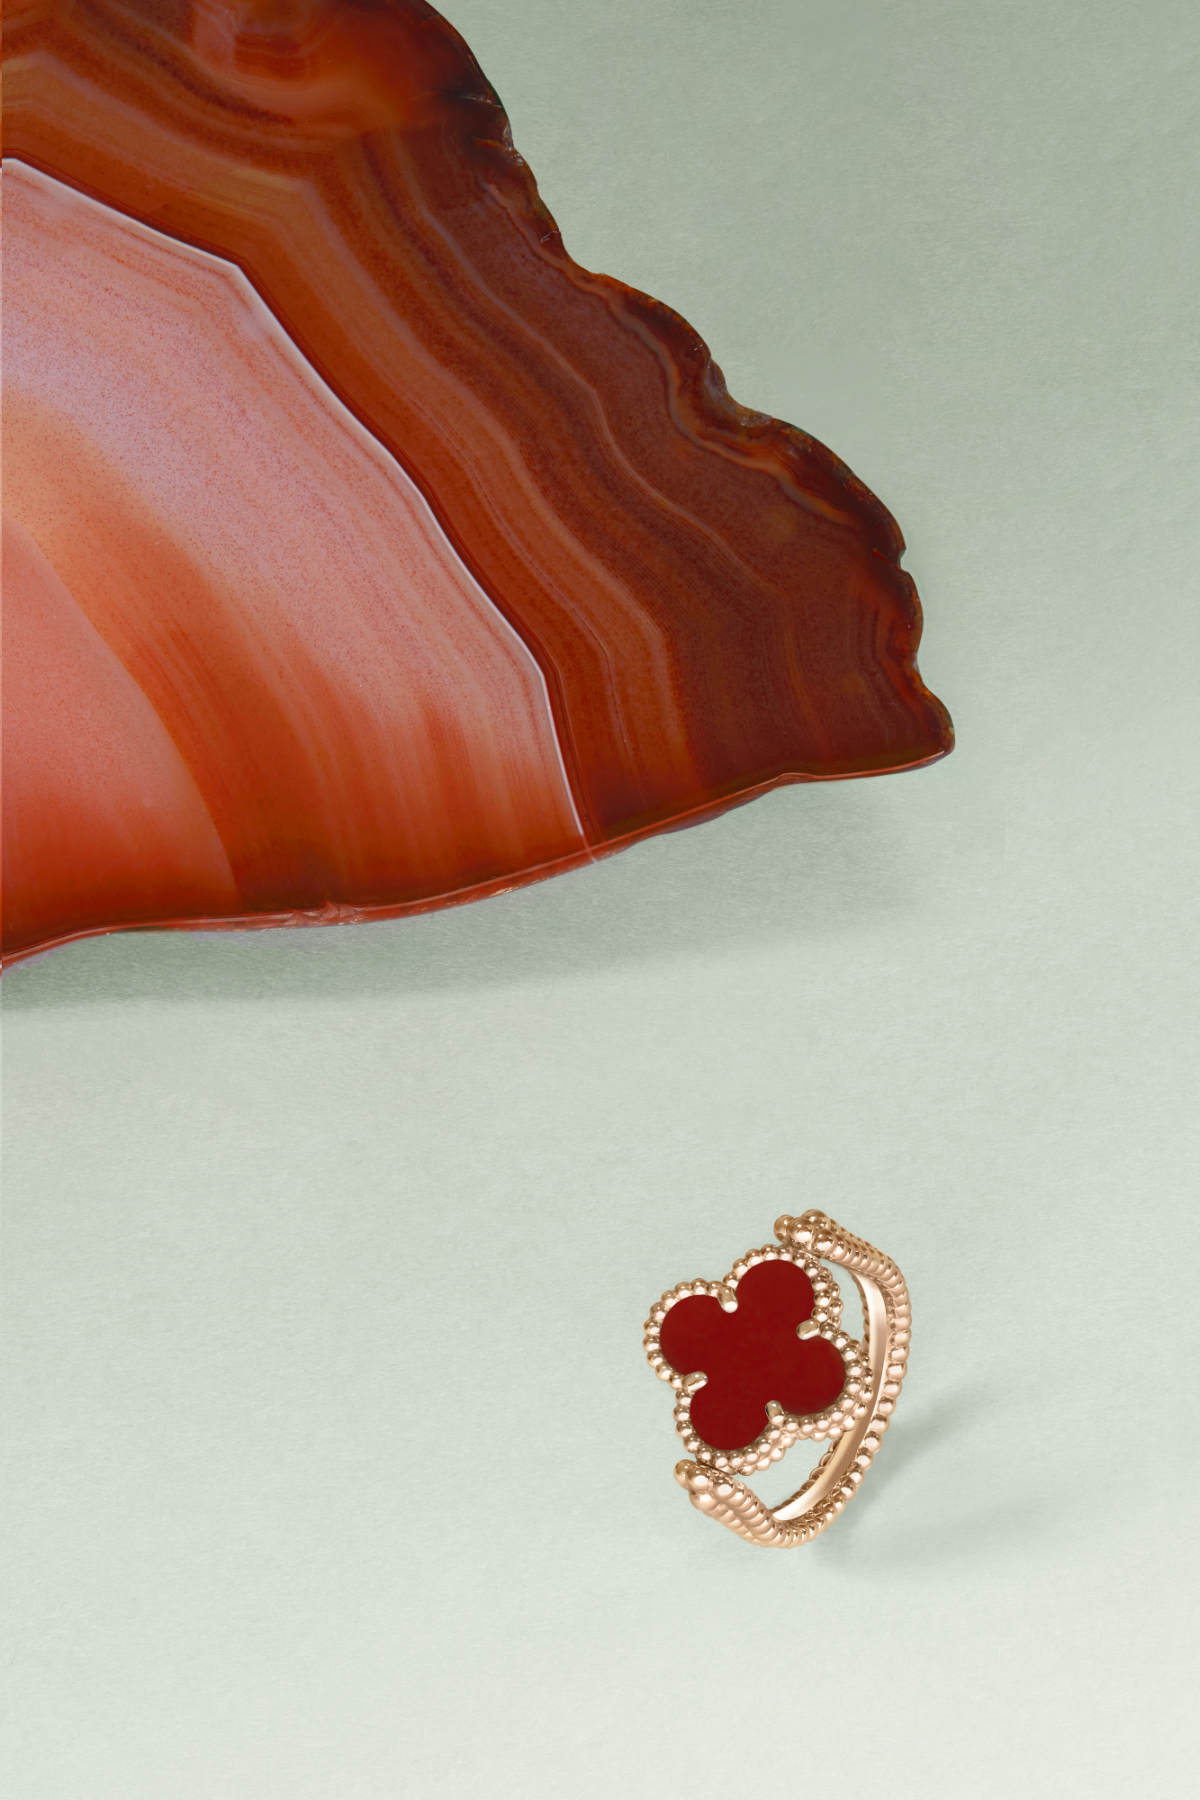 Van Cleef & Arpels introduces new lucky charms to the iconic Alhambra  collection